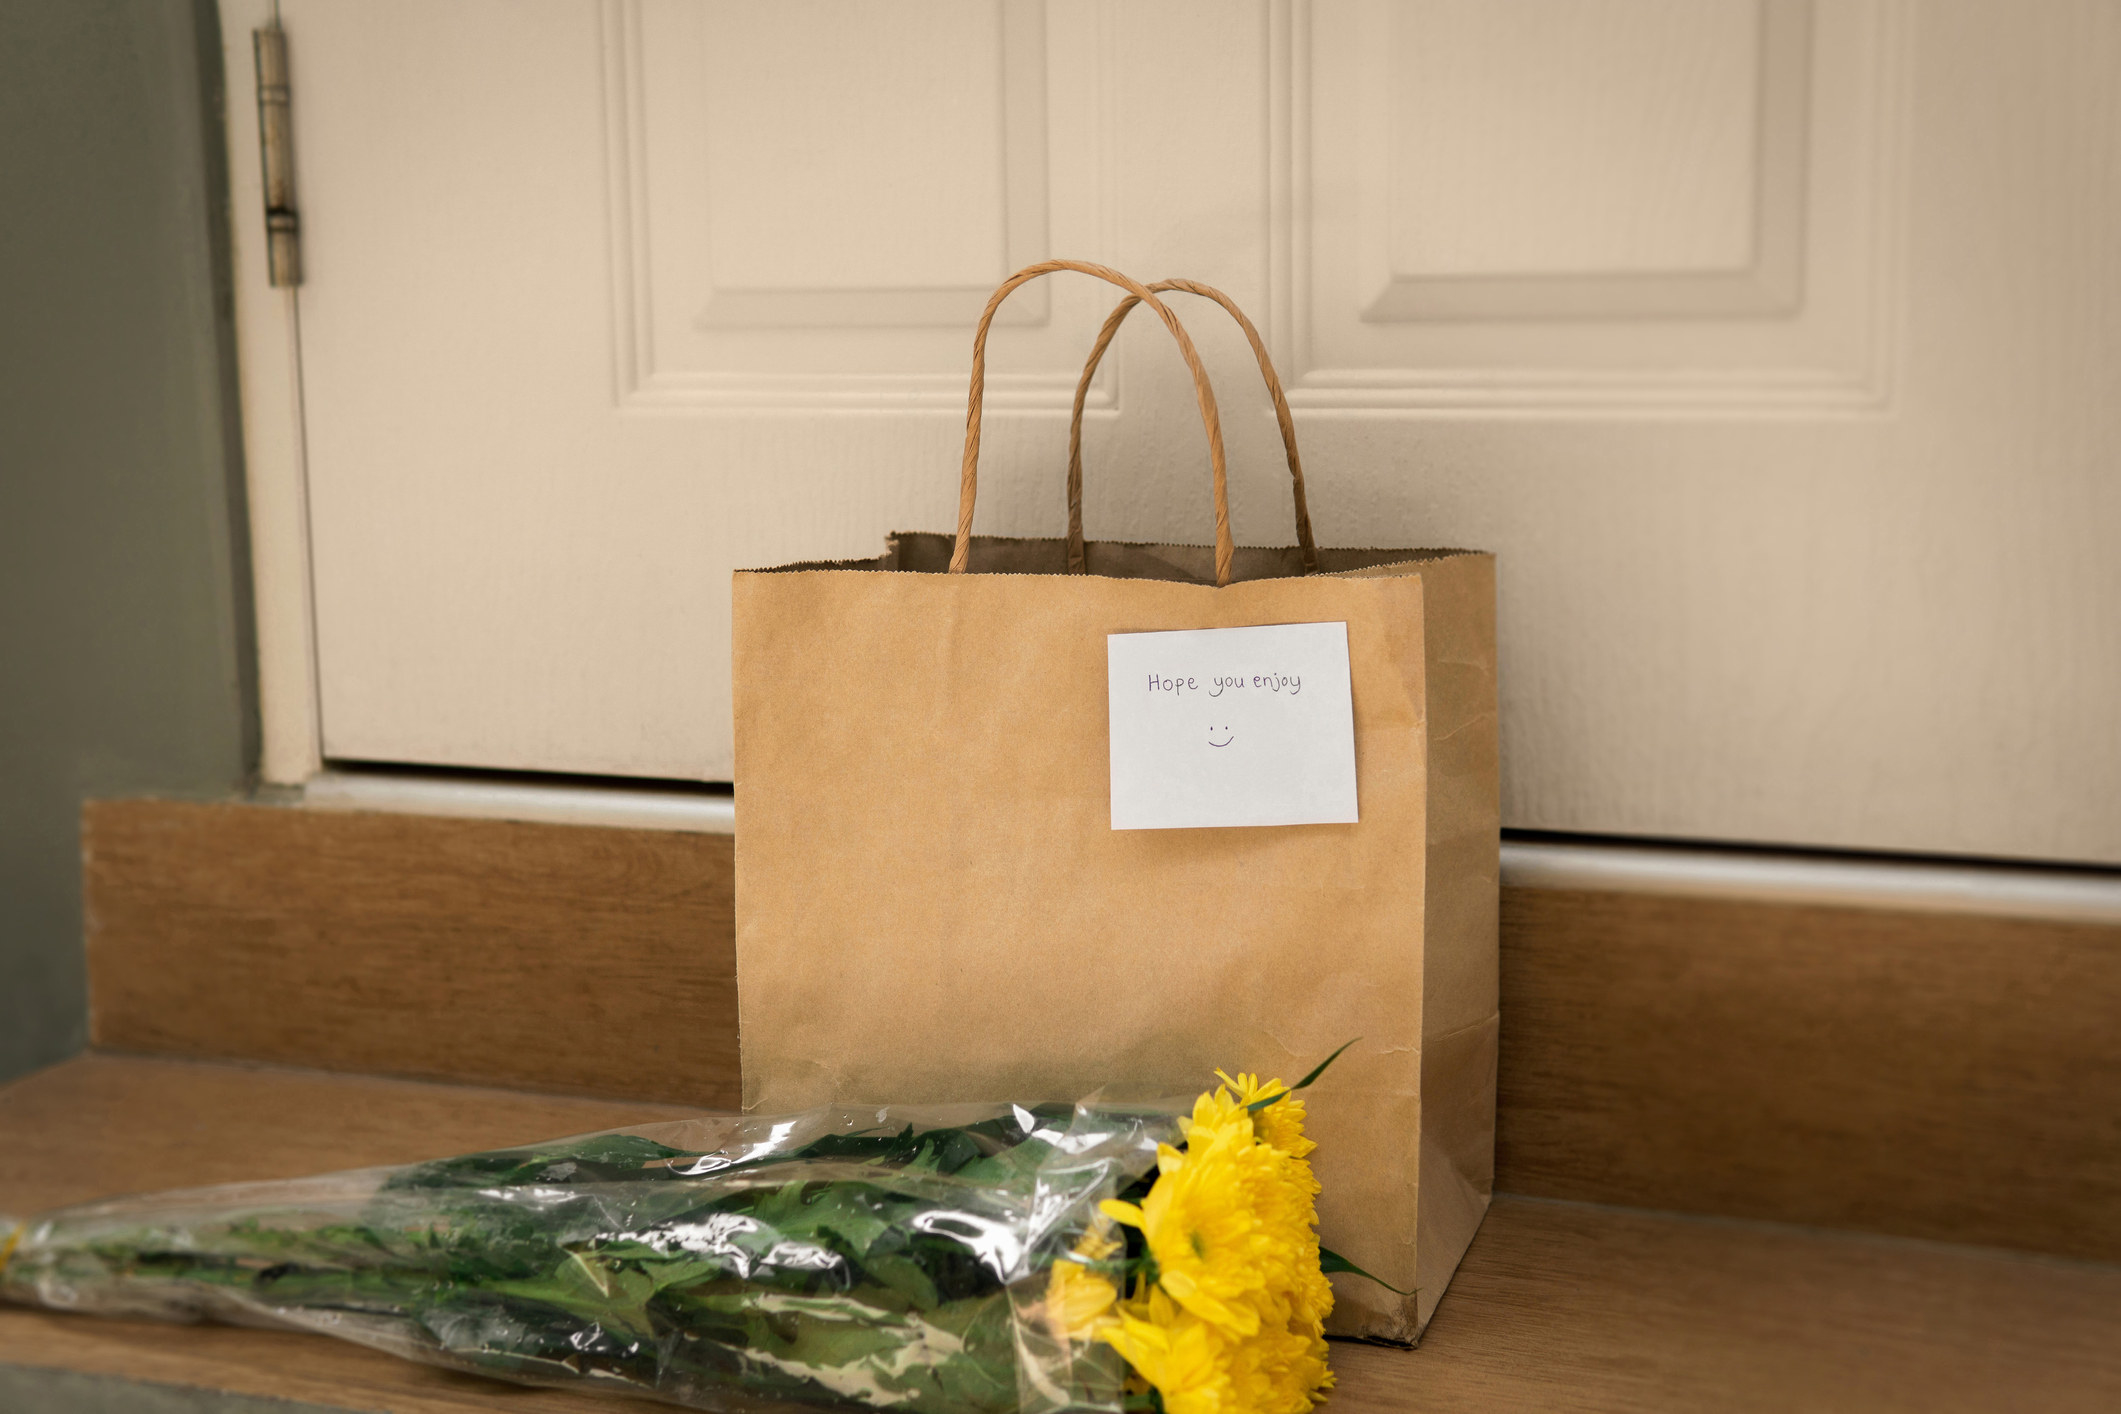 Bouquet of flowers and paper bag left outside of front door